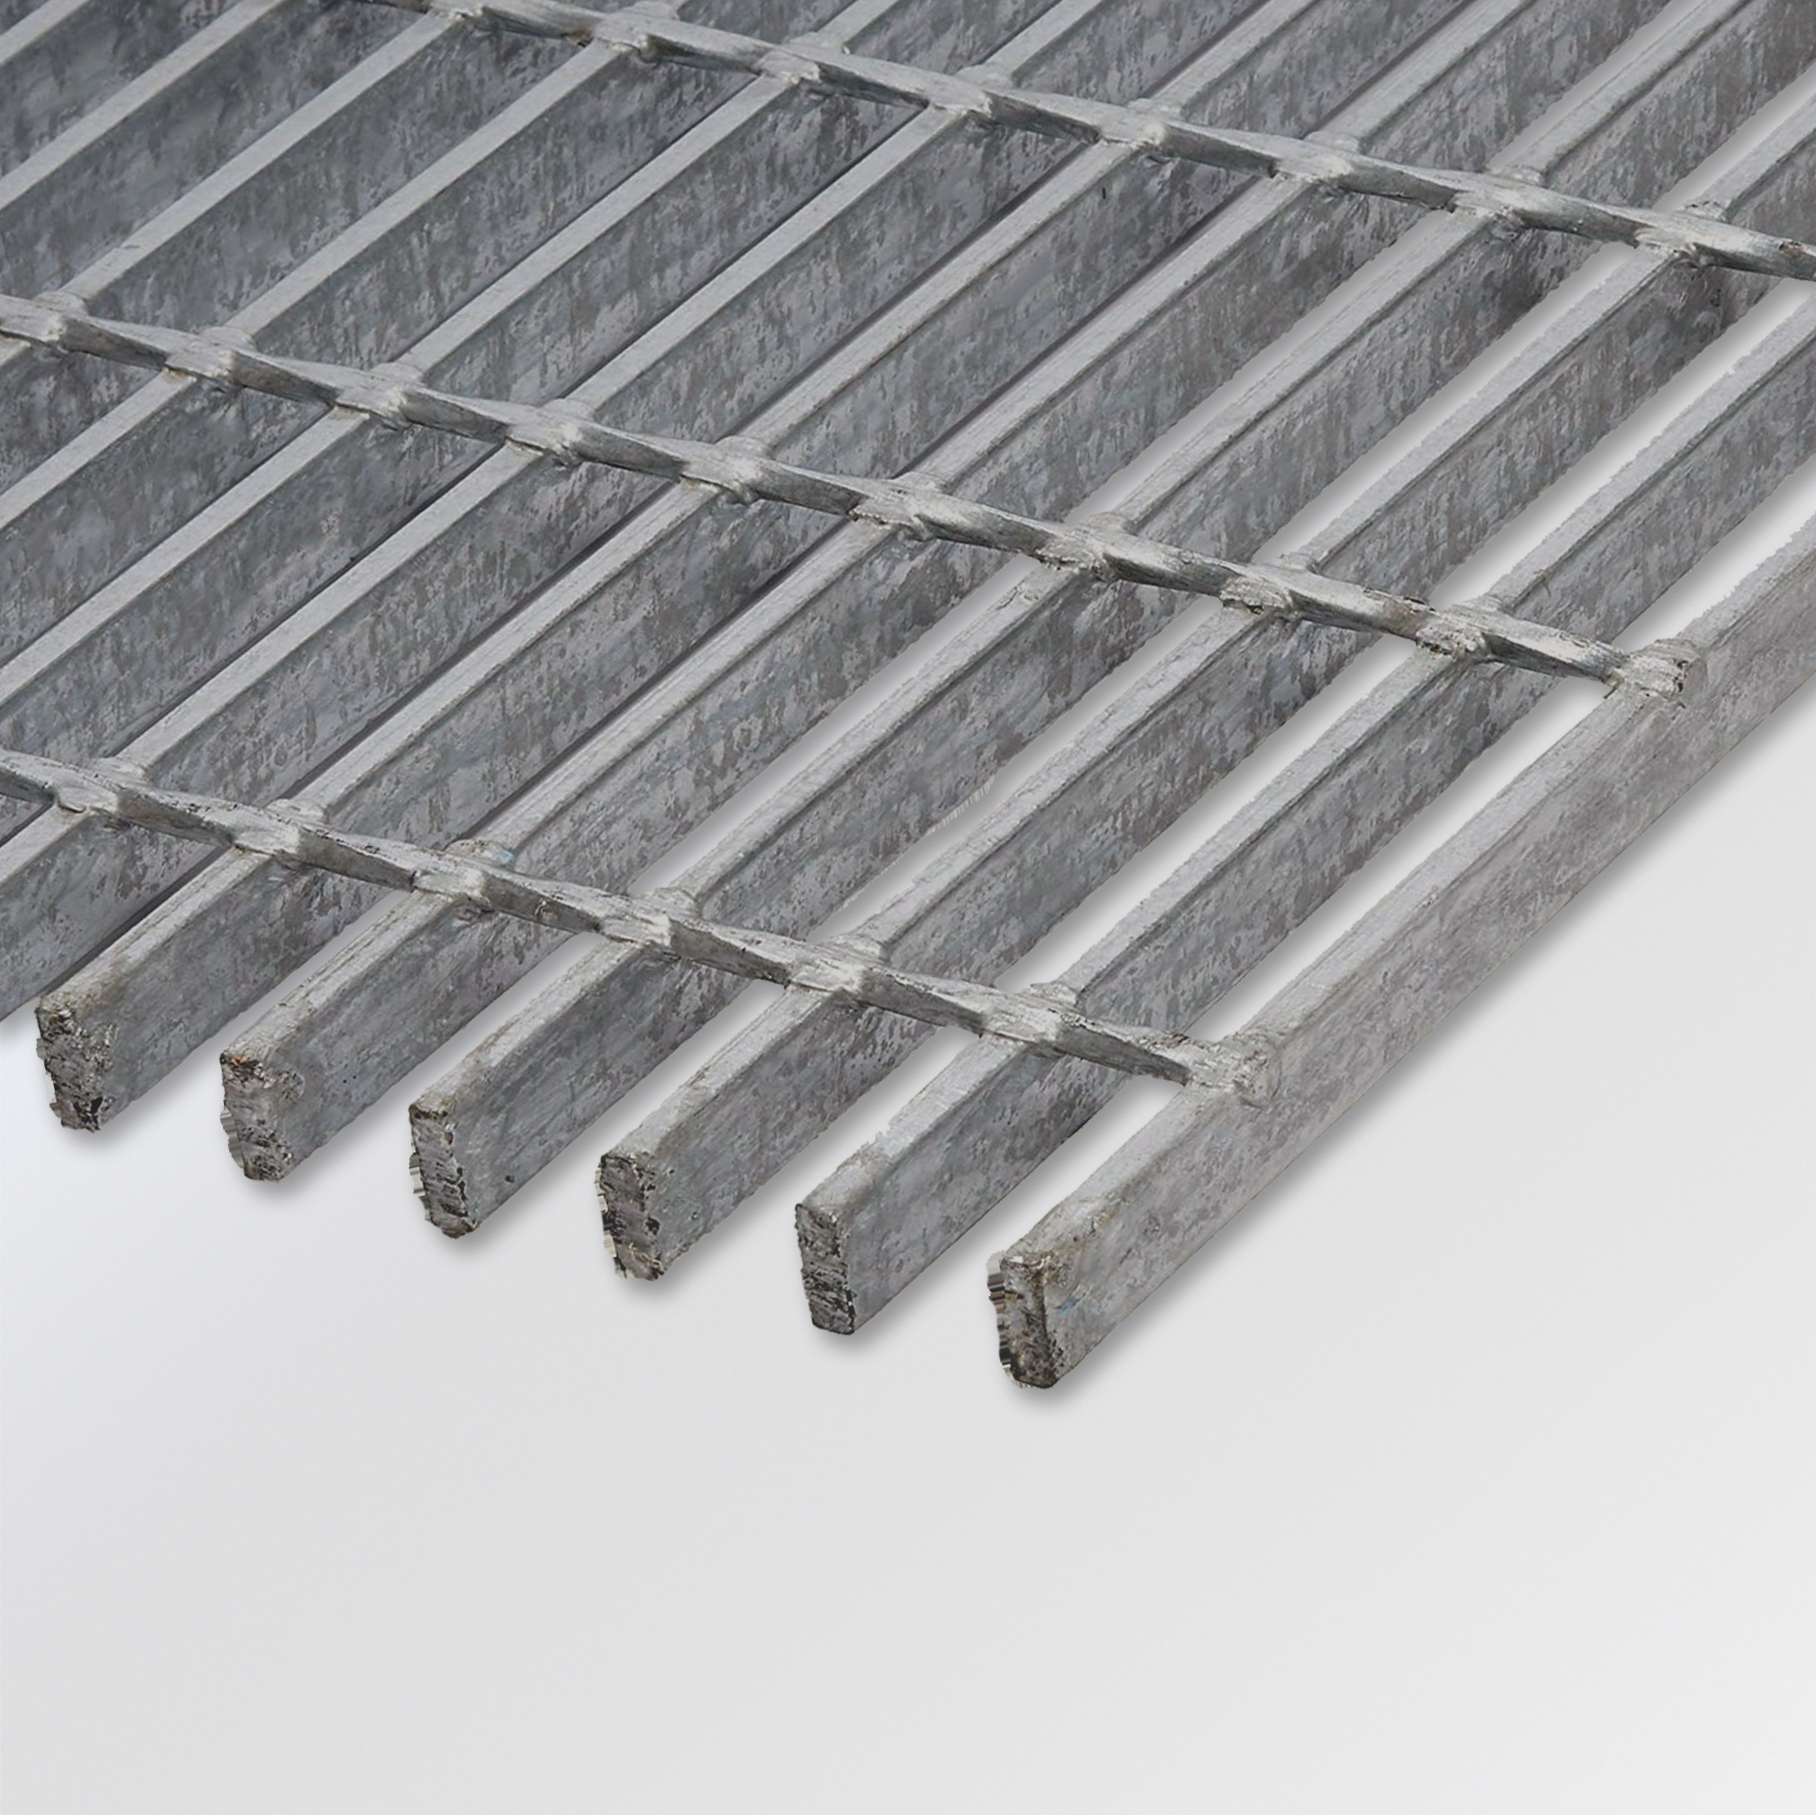 H W,1In DIRECT METALS 22125R100-B2 Bar Grating,Serrated,24In